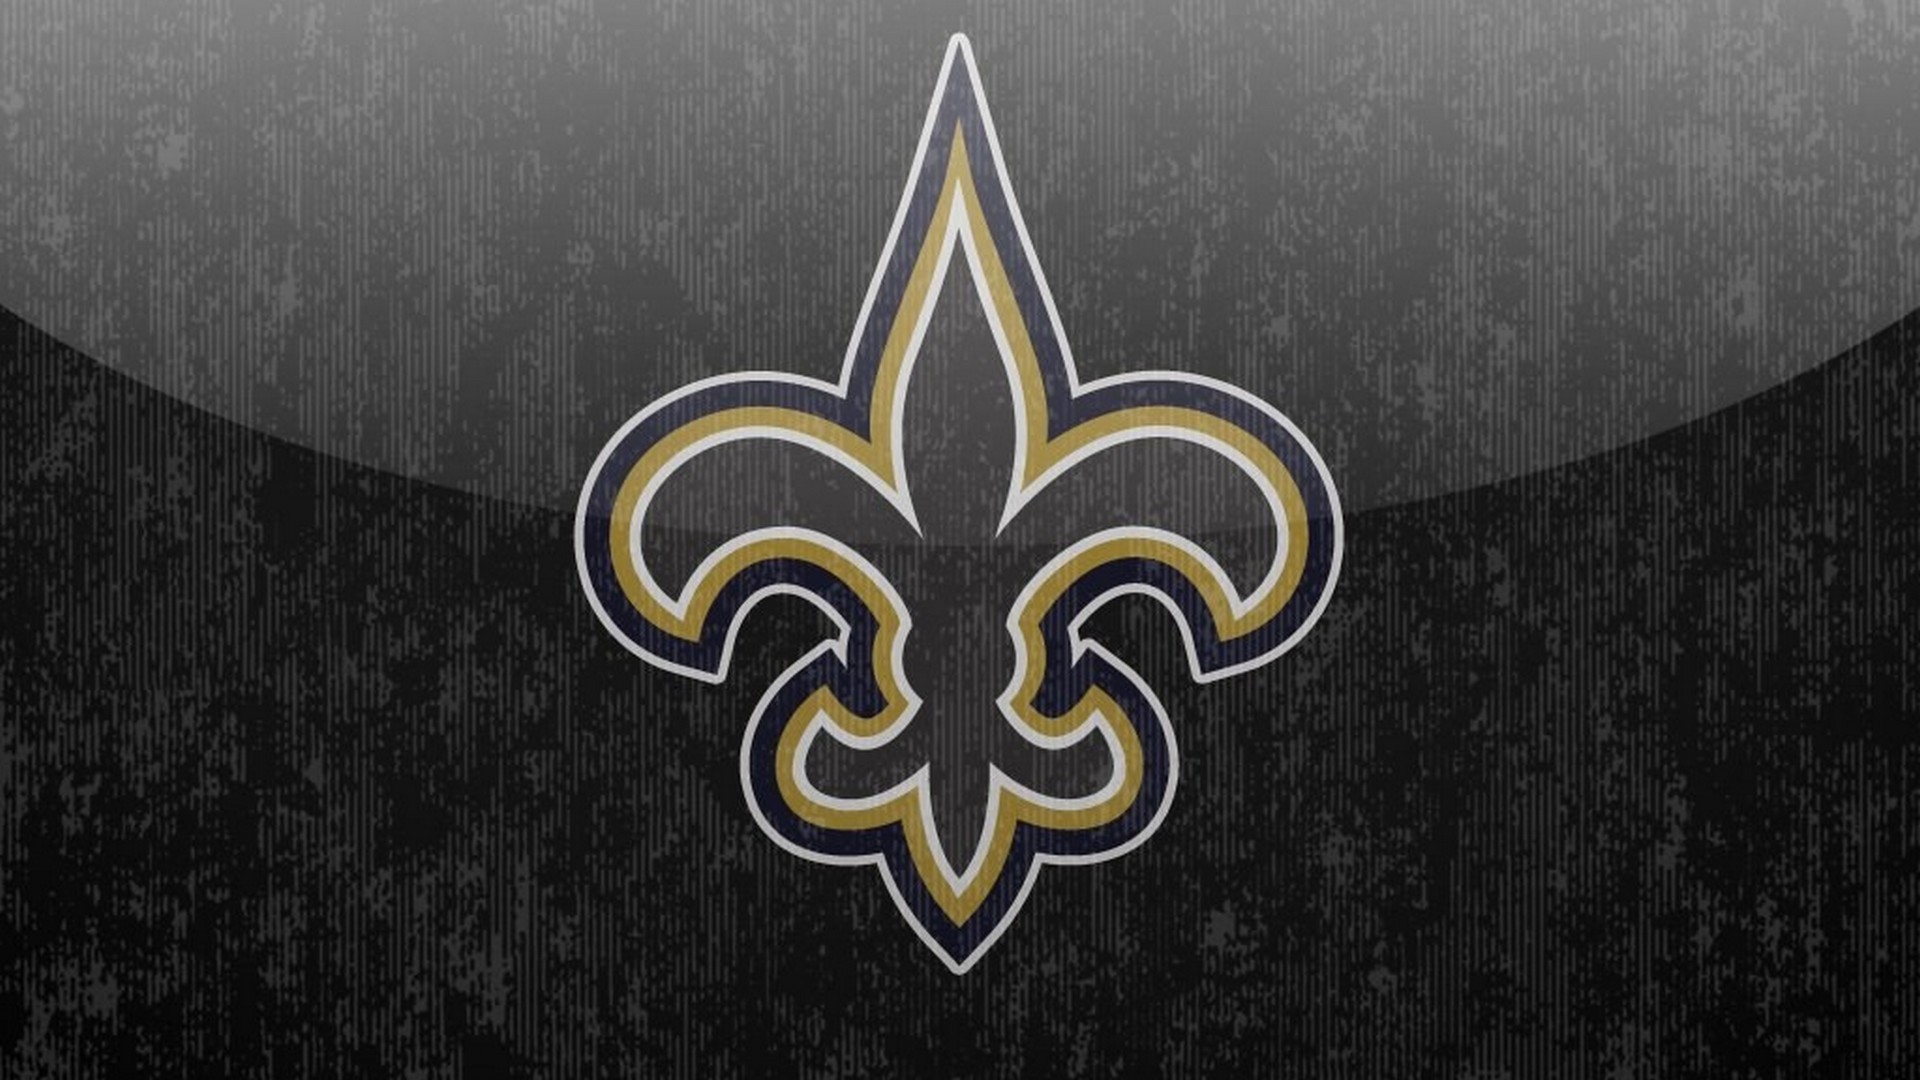 Wallpaper Desktop New Orleans Saints NFL HD with resolution 1920x1080 pixel. You can make this wallpaper for your Mac or Windows Desktop Background, iPhone, Android or Tablet and another Smartphone device